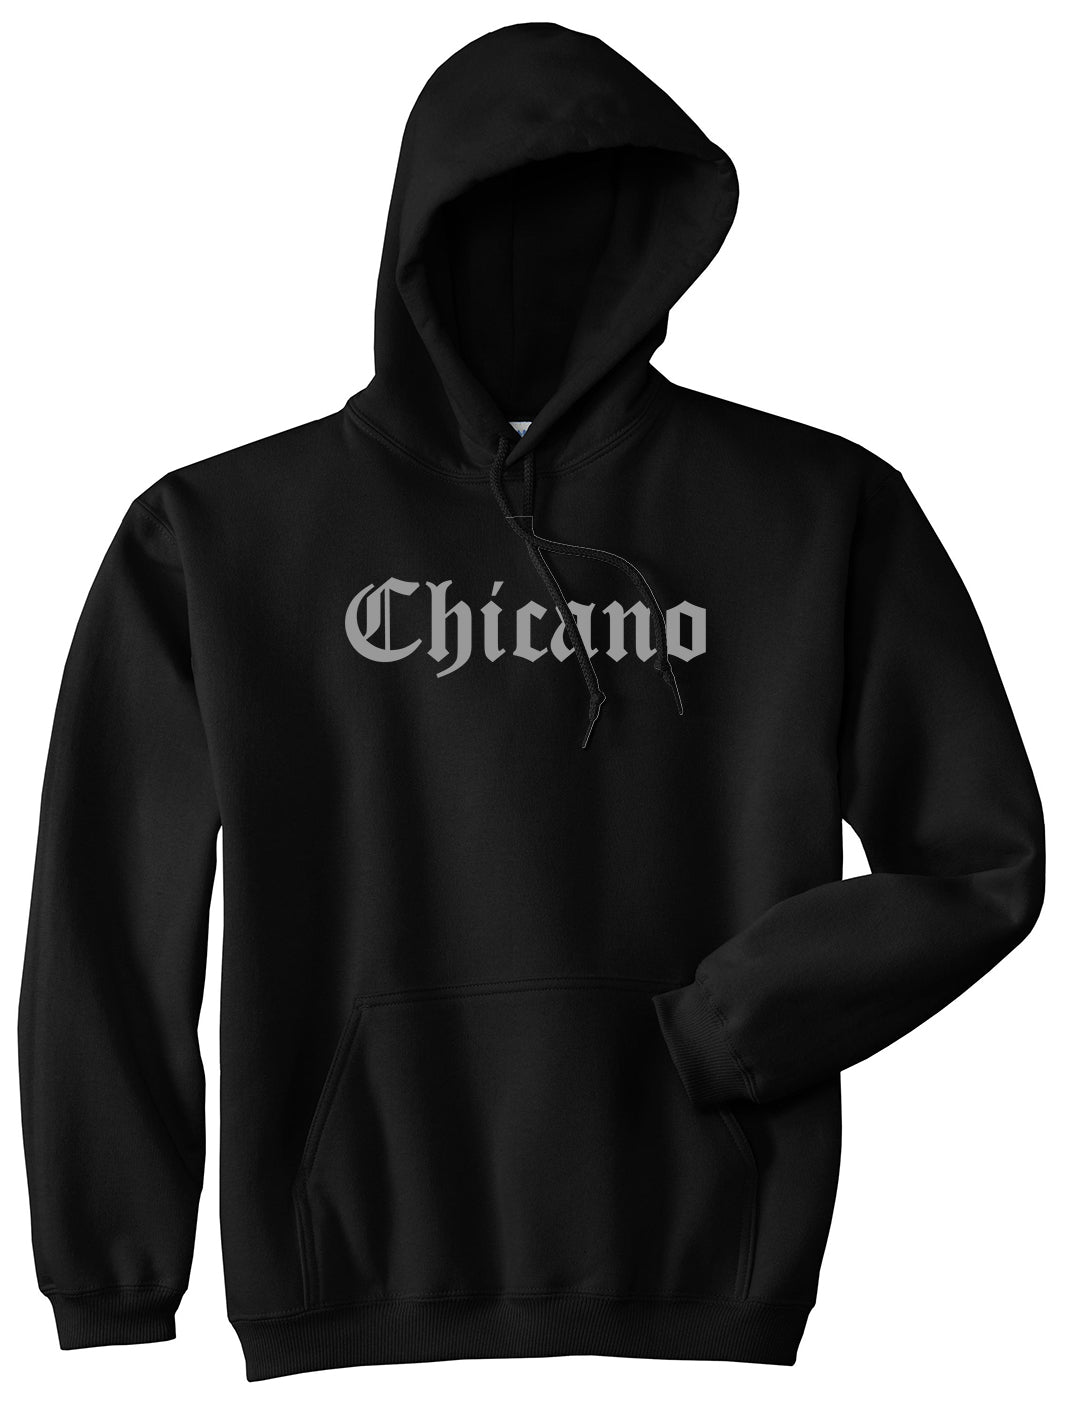 Chicano Mexican Mens Pullover Hoodie Black